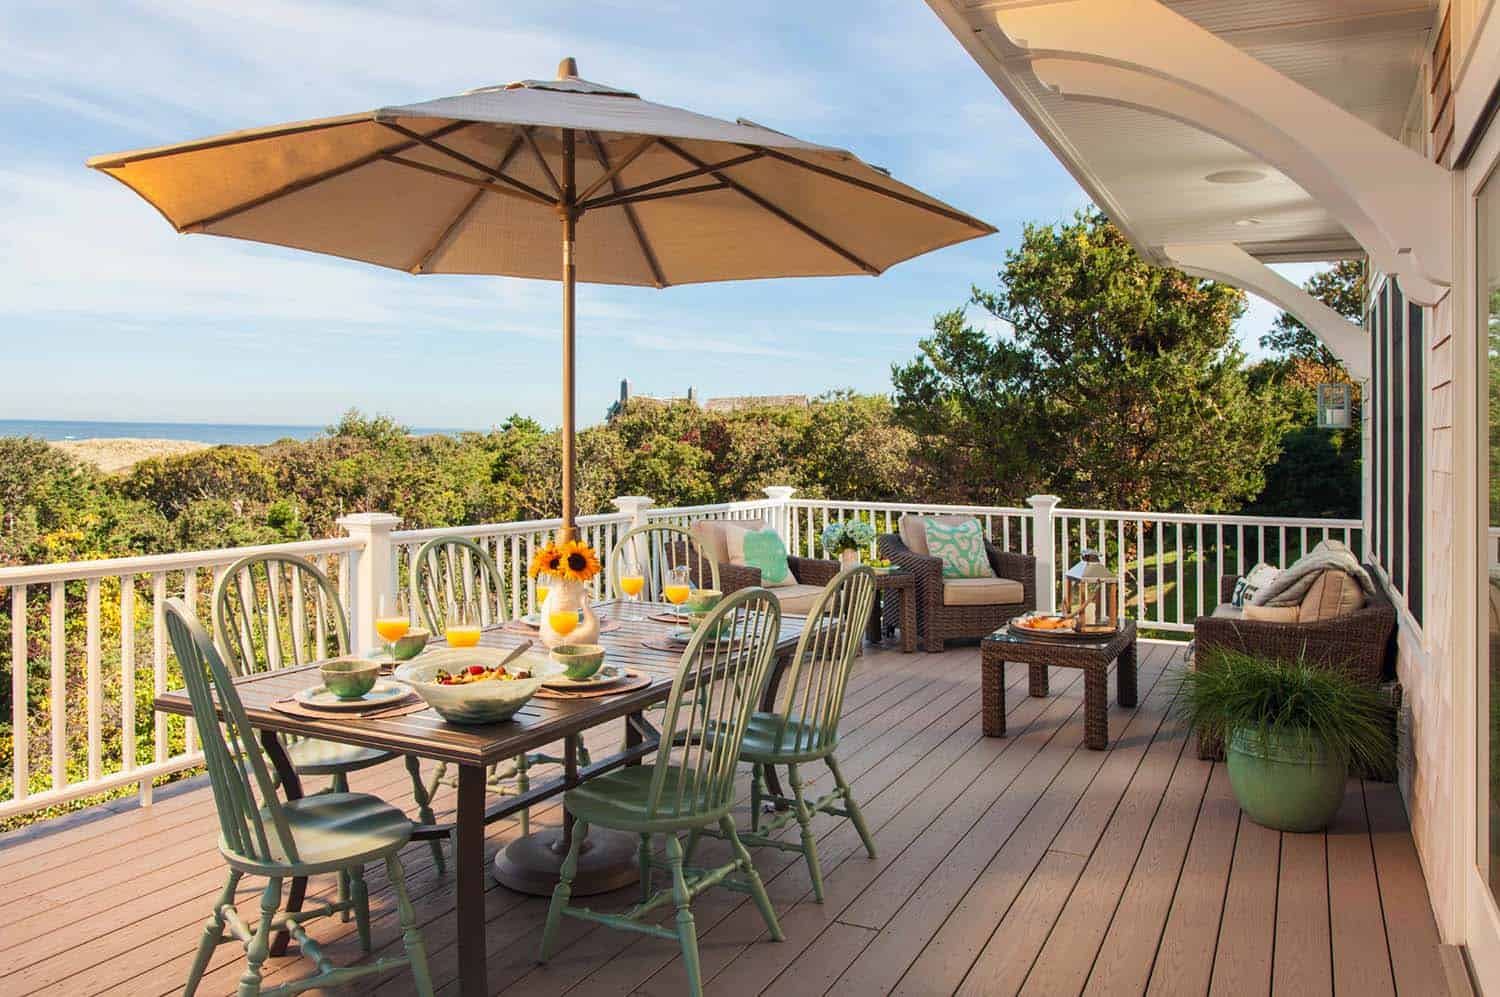 30+ Amazing beach style deck ideas promoting relaxation